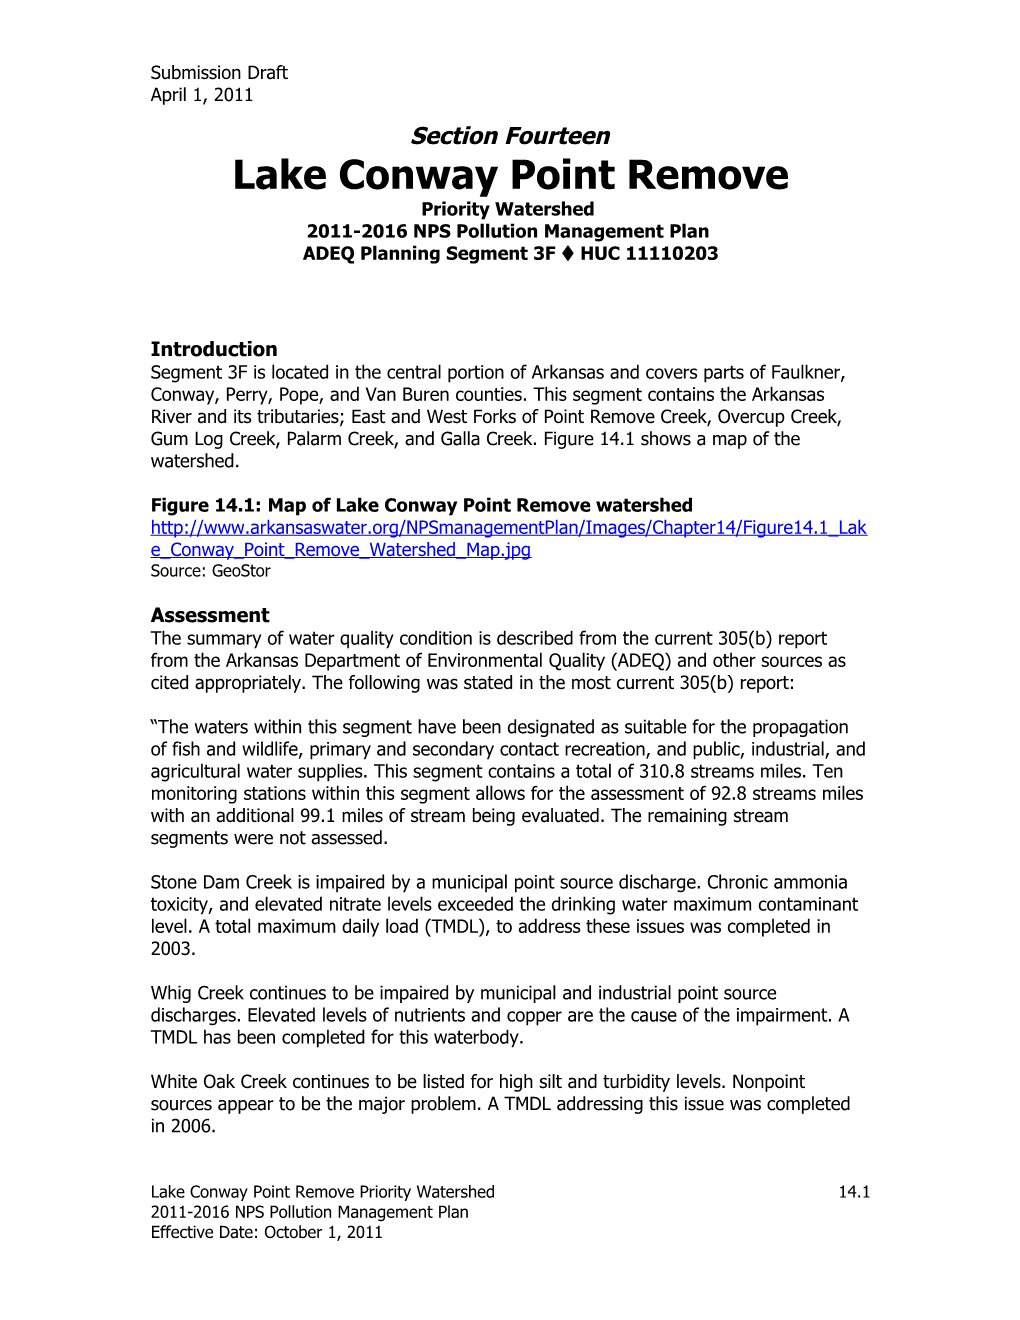 Lake Conway Point Remove